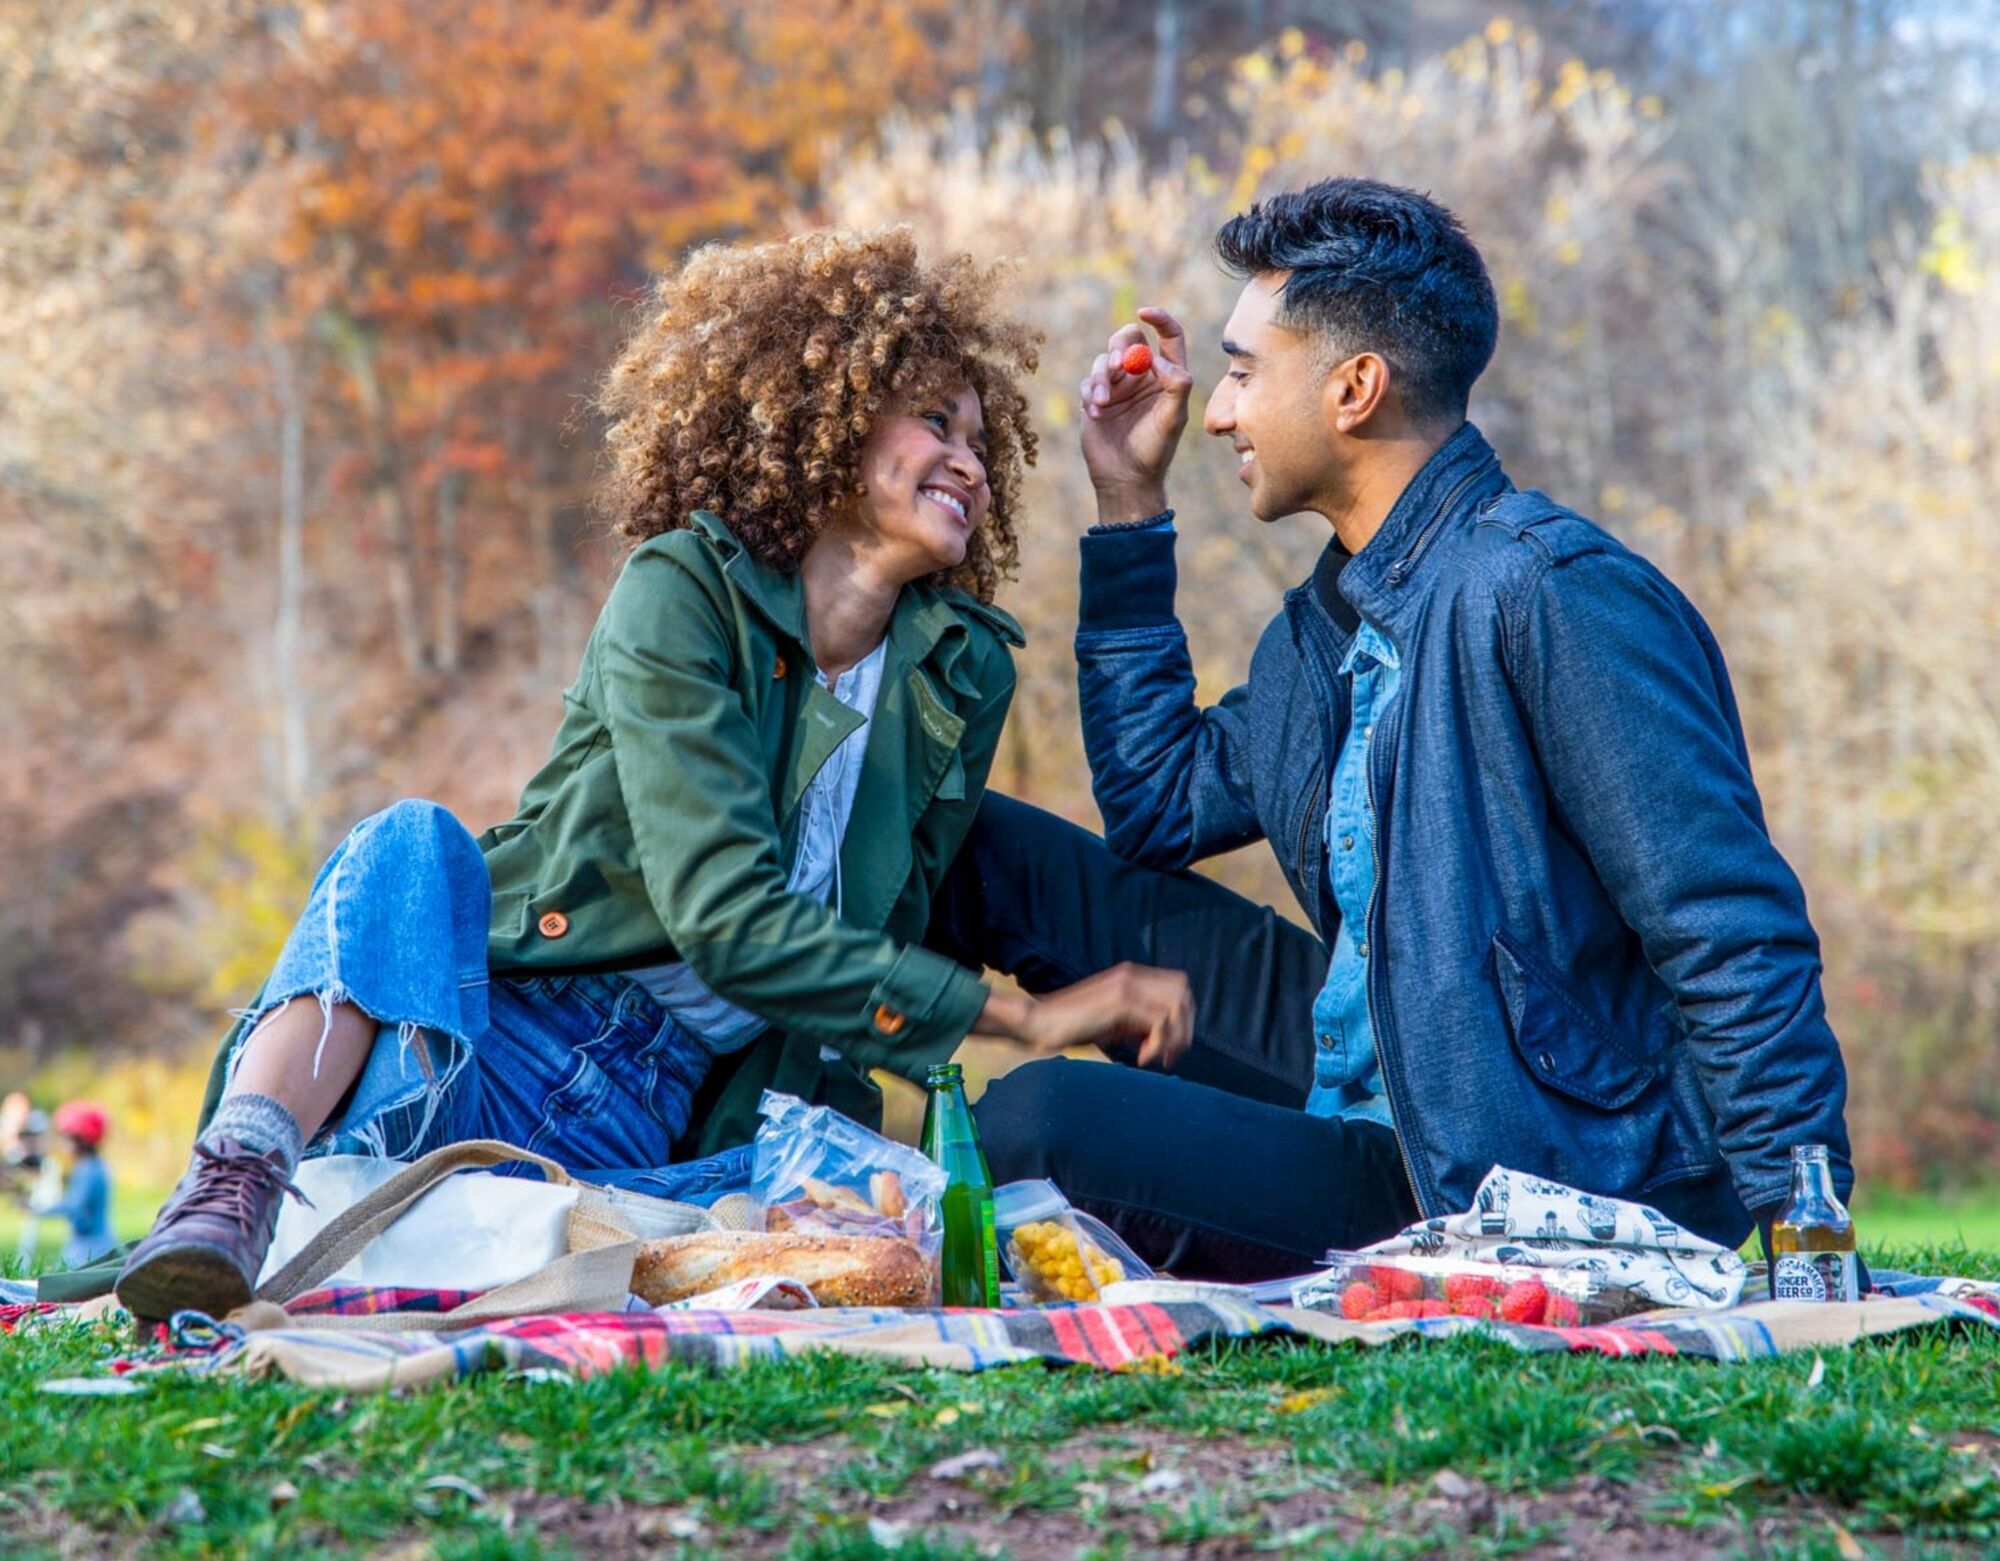 A couple having an outdoor picnic, cuddling on a plaid blanket, with sandwiches, snacks and drinks in front of them.